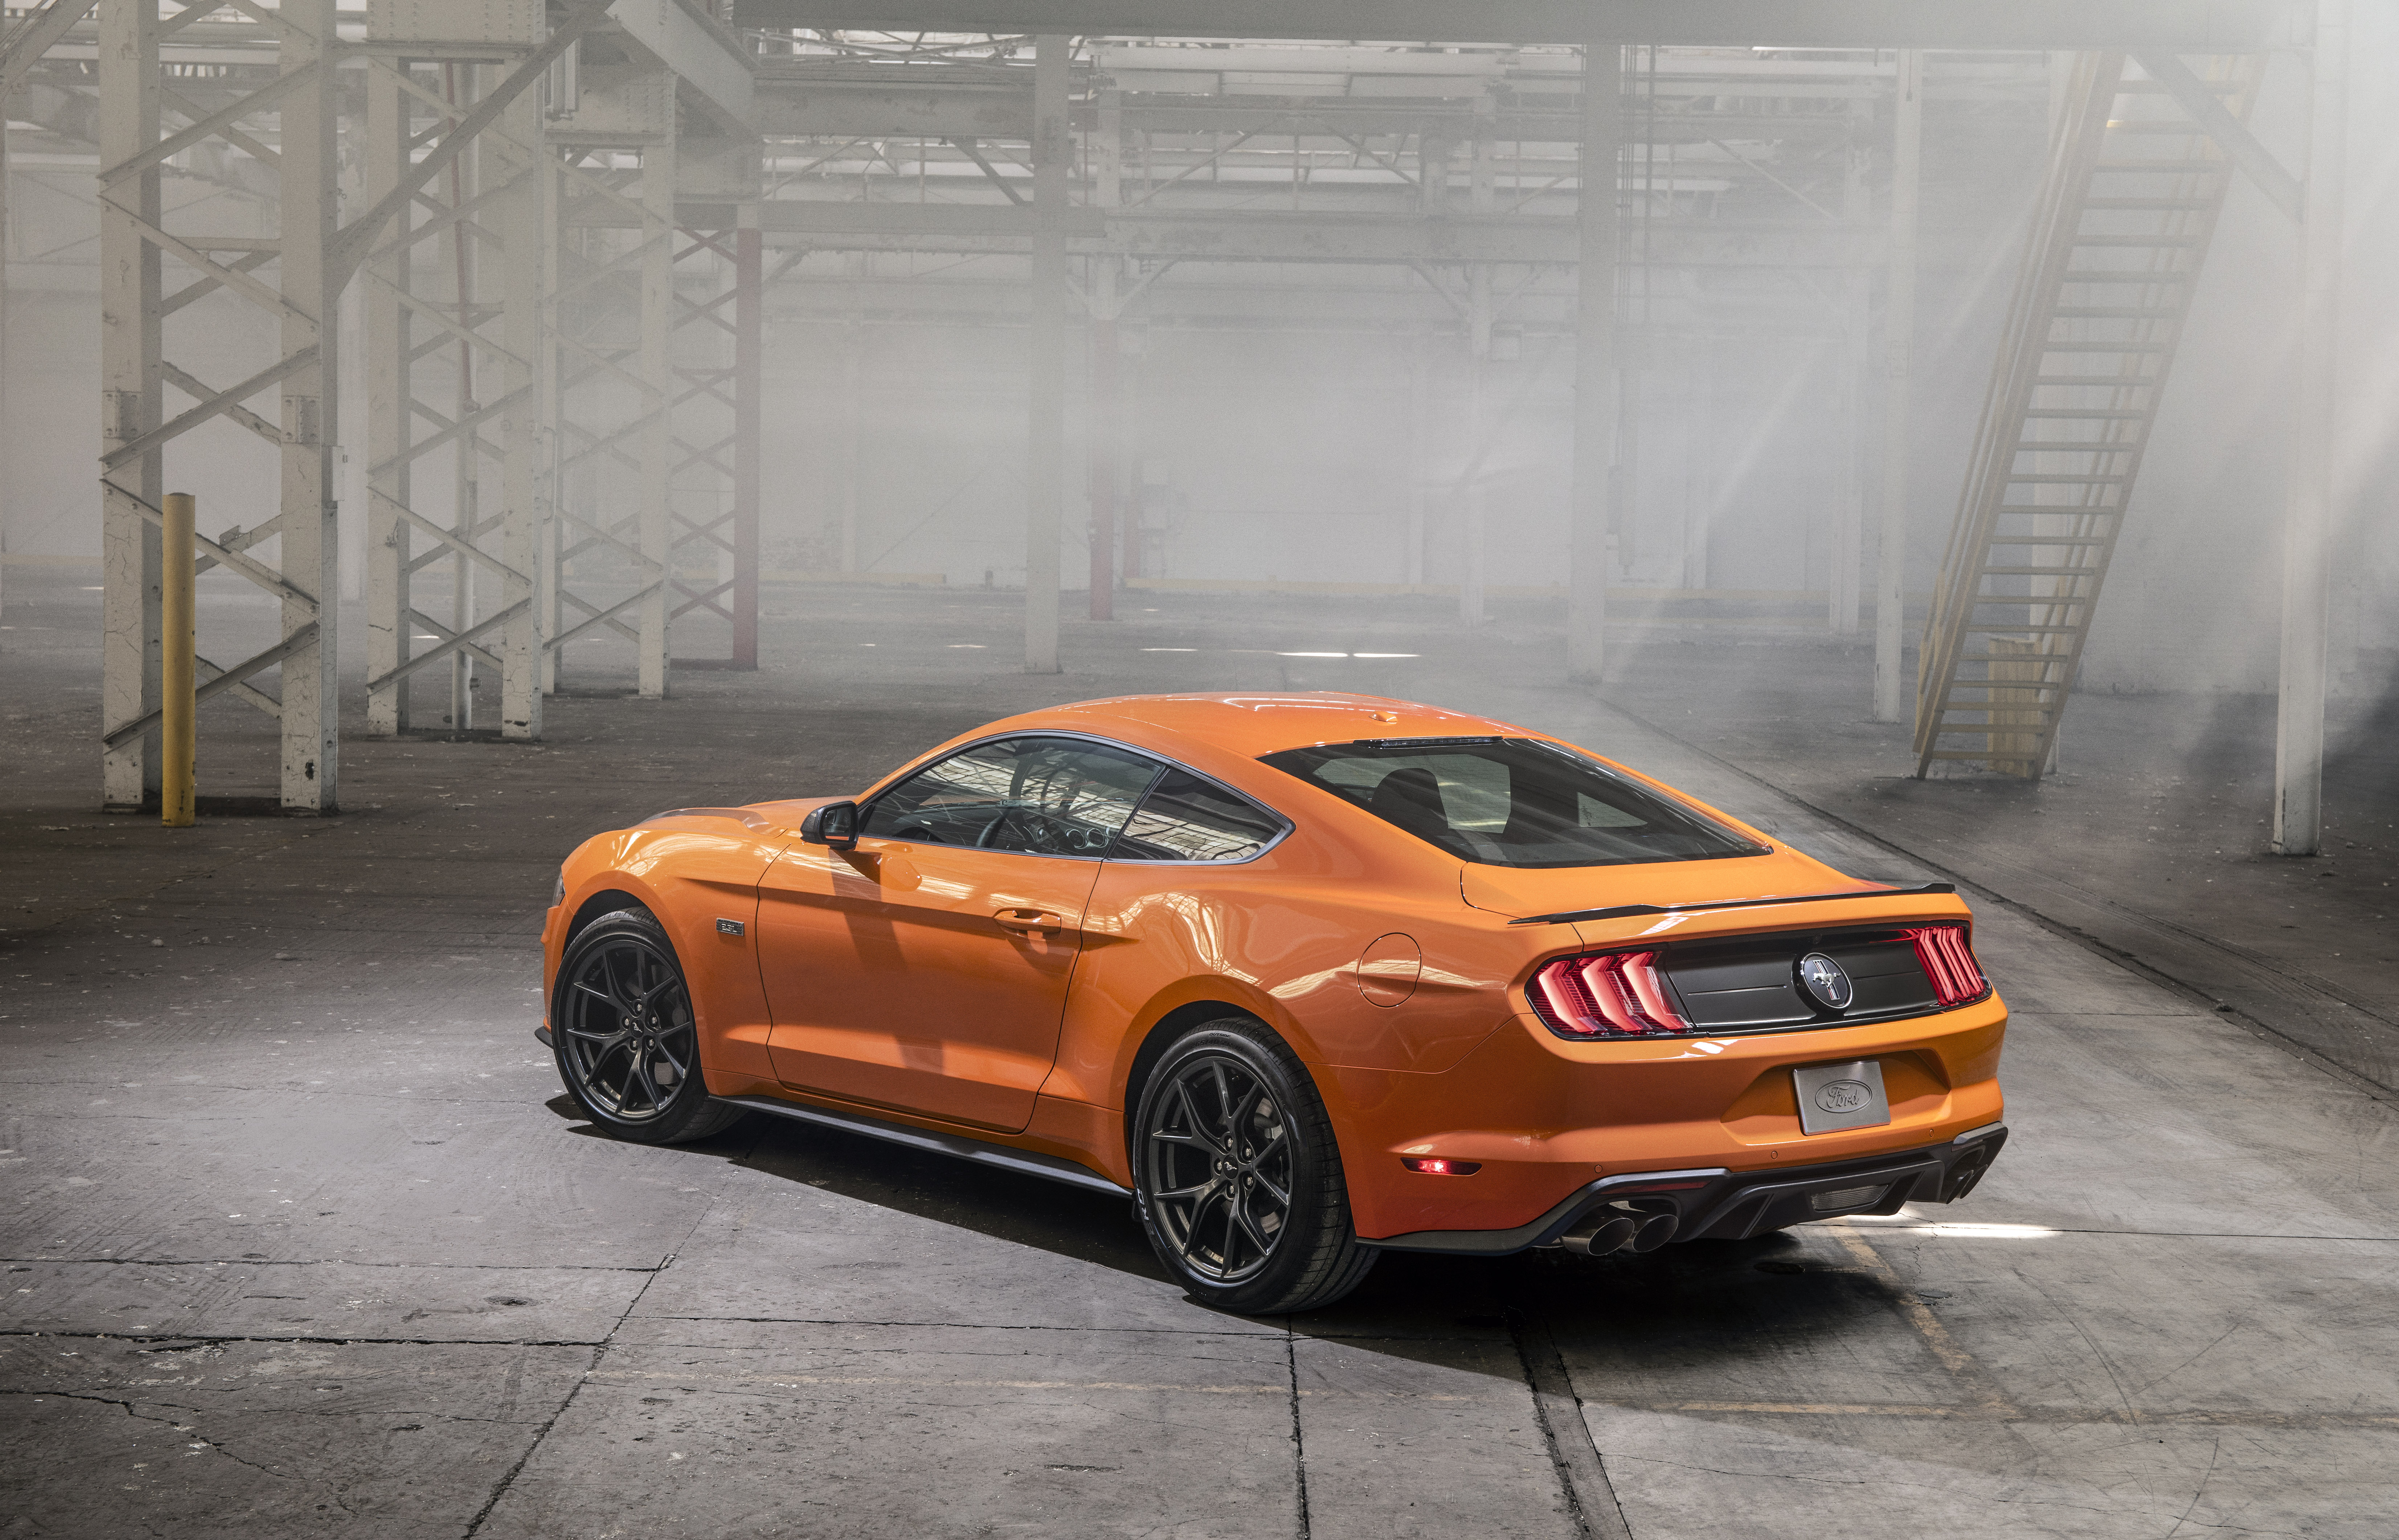 Car Ford Ford Mustang Muscle Car Orange Car Vehicle 6611x4245